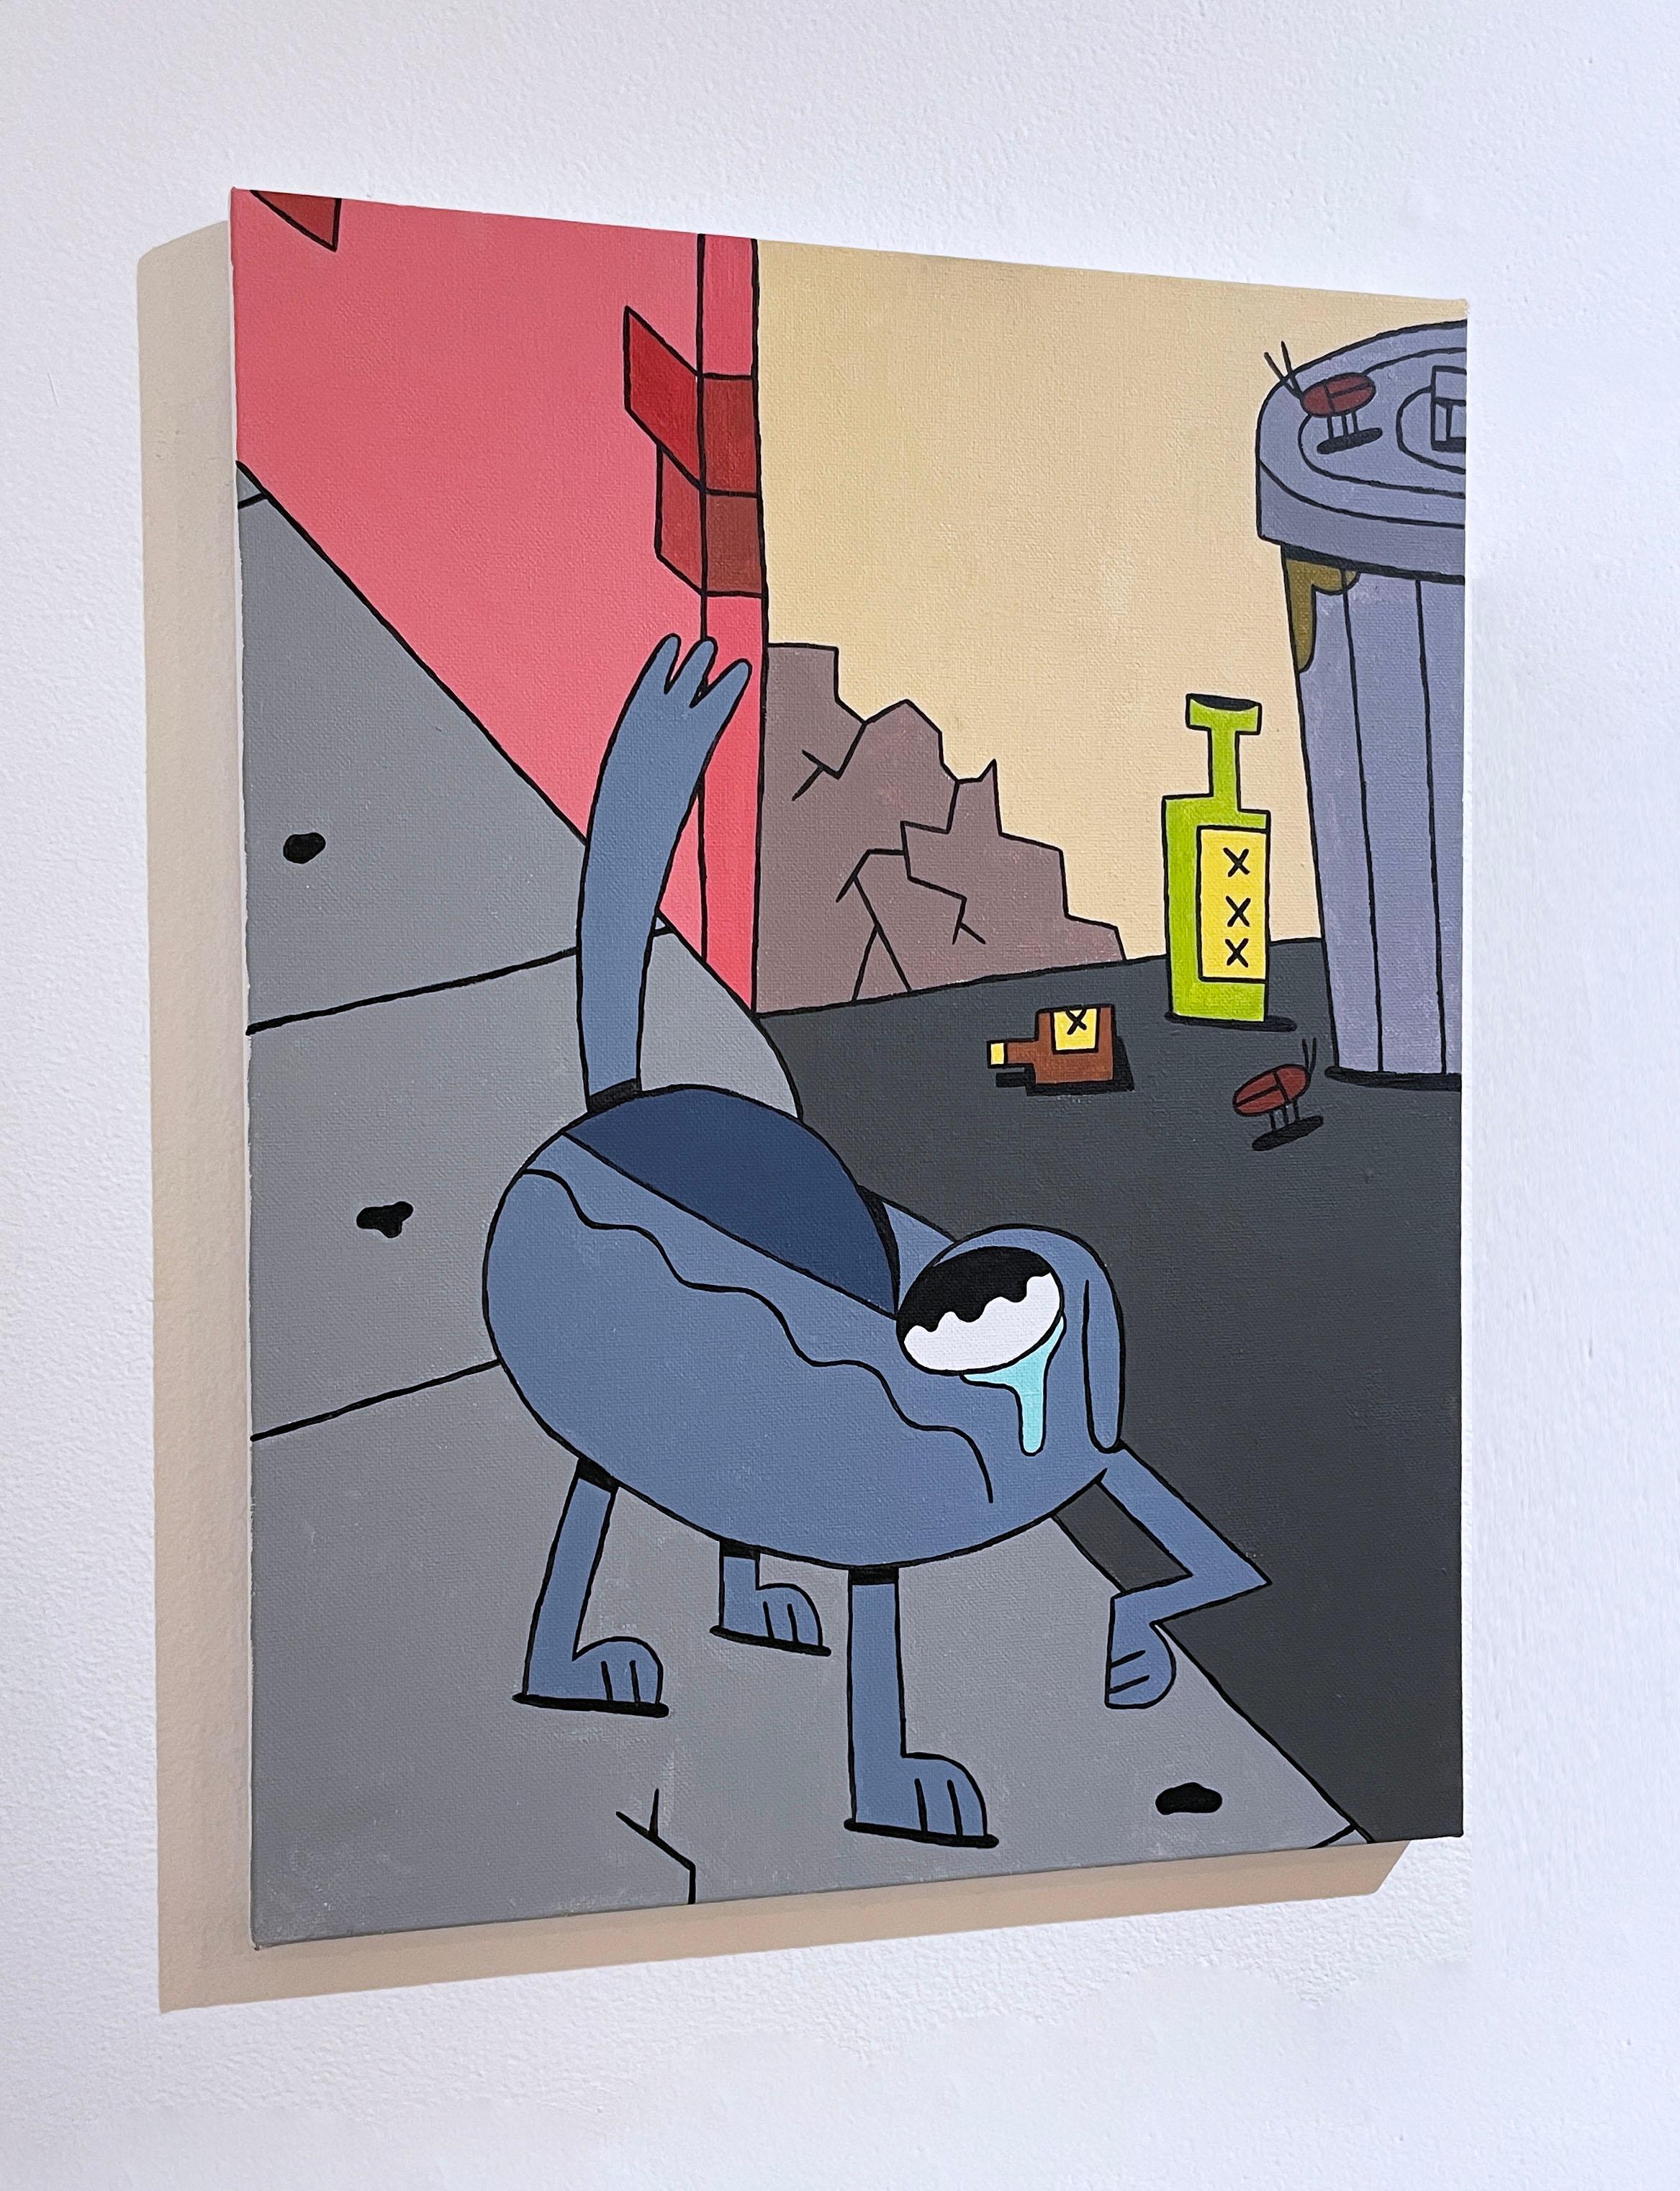 Teary Eyed by BARC the dog, acrylic on canvas pop art comic book animal character, illustration cartoon style painting

Welcome to the world BARC the dog. In this vignette he has just been turned away from his owner, a necessary but sad turn of